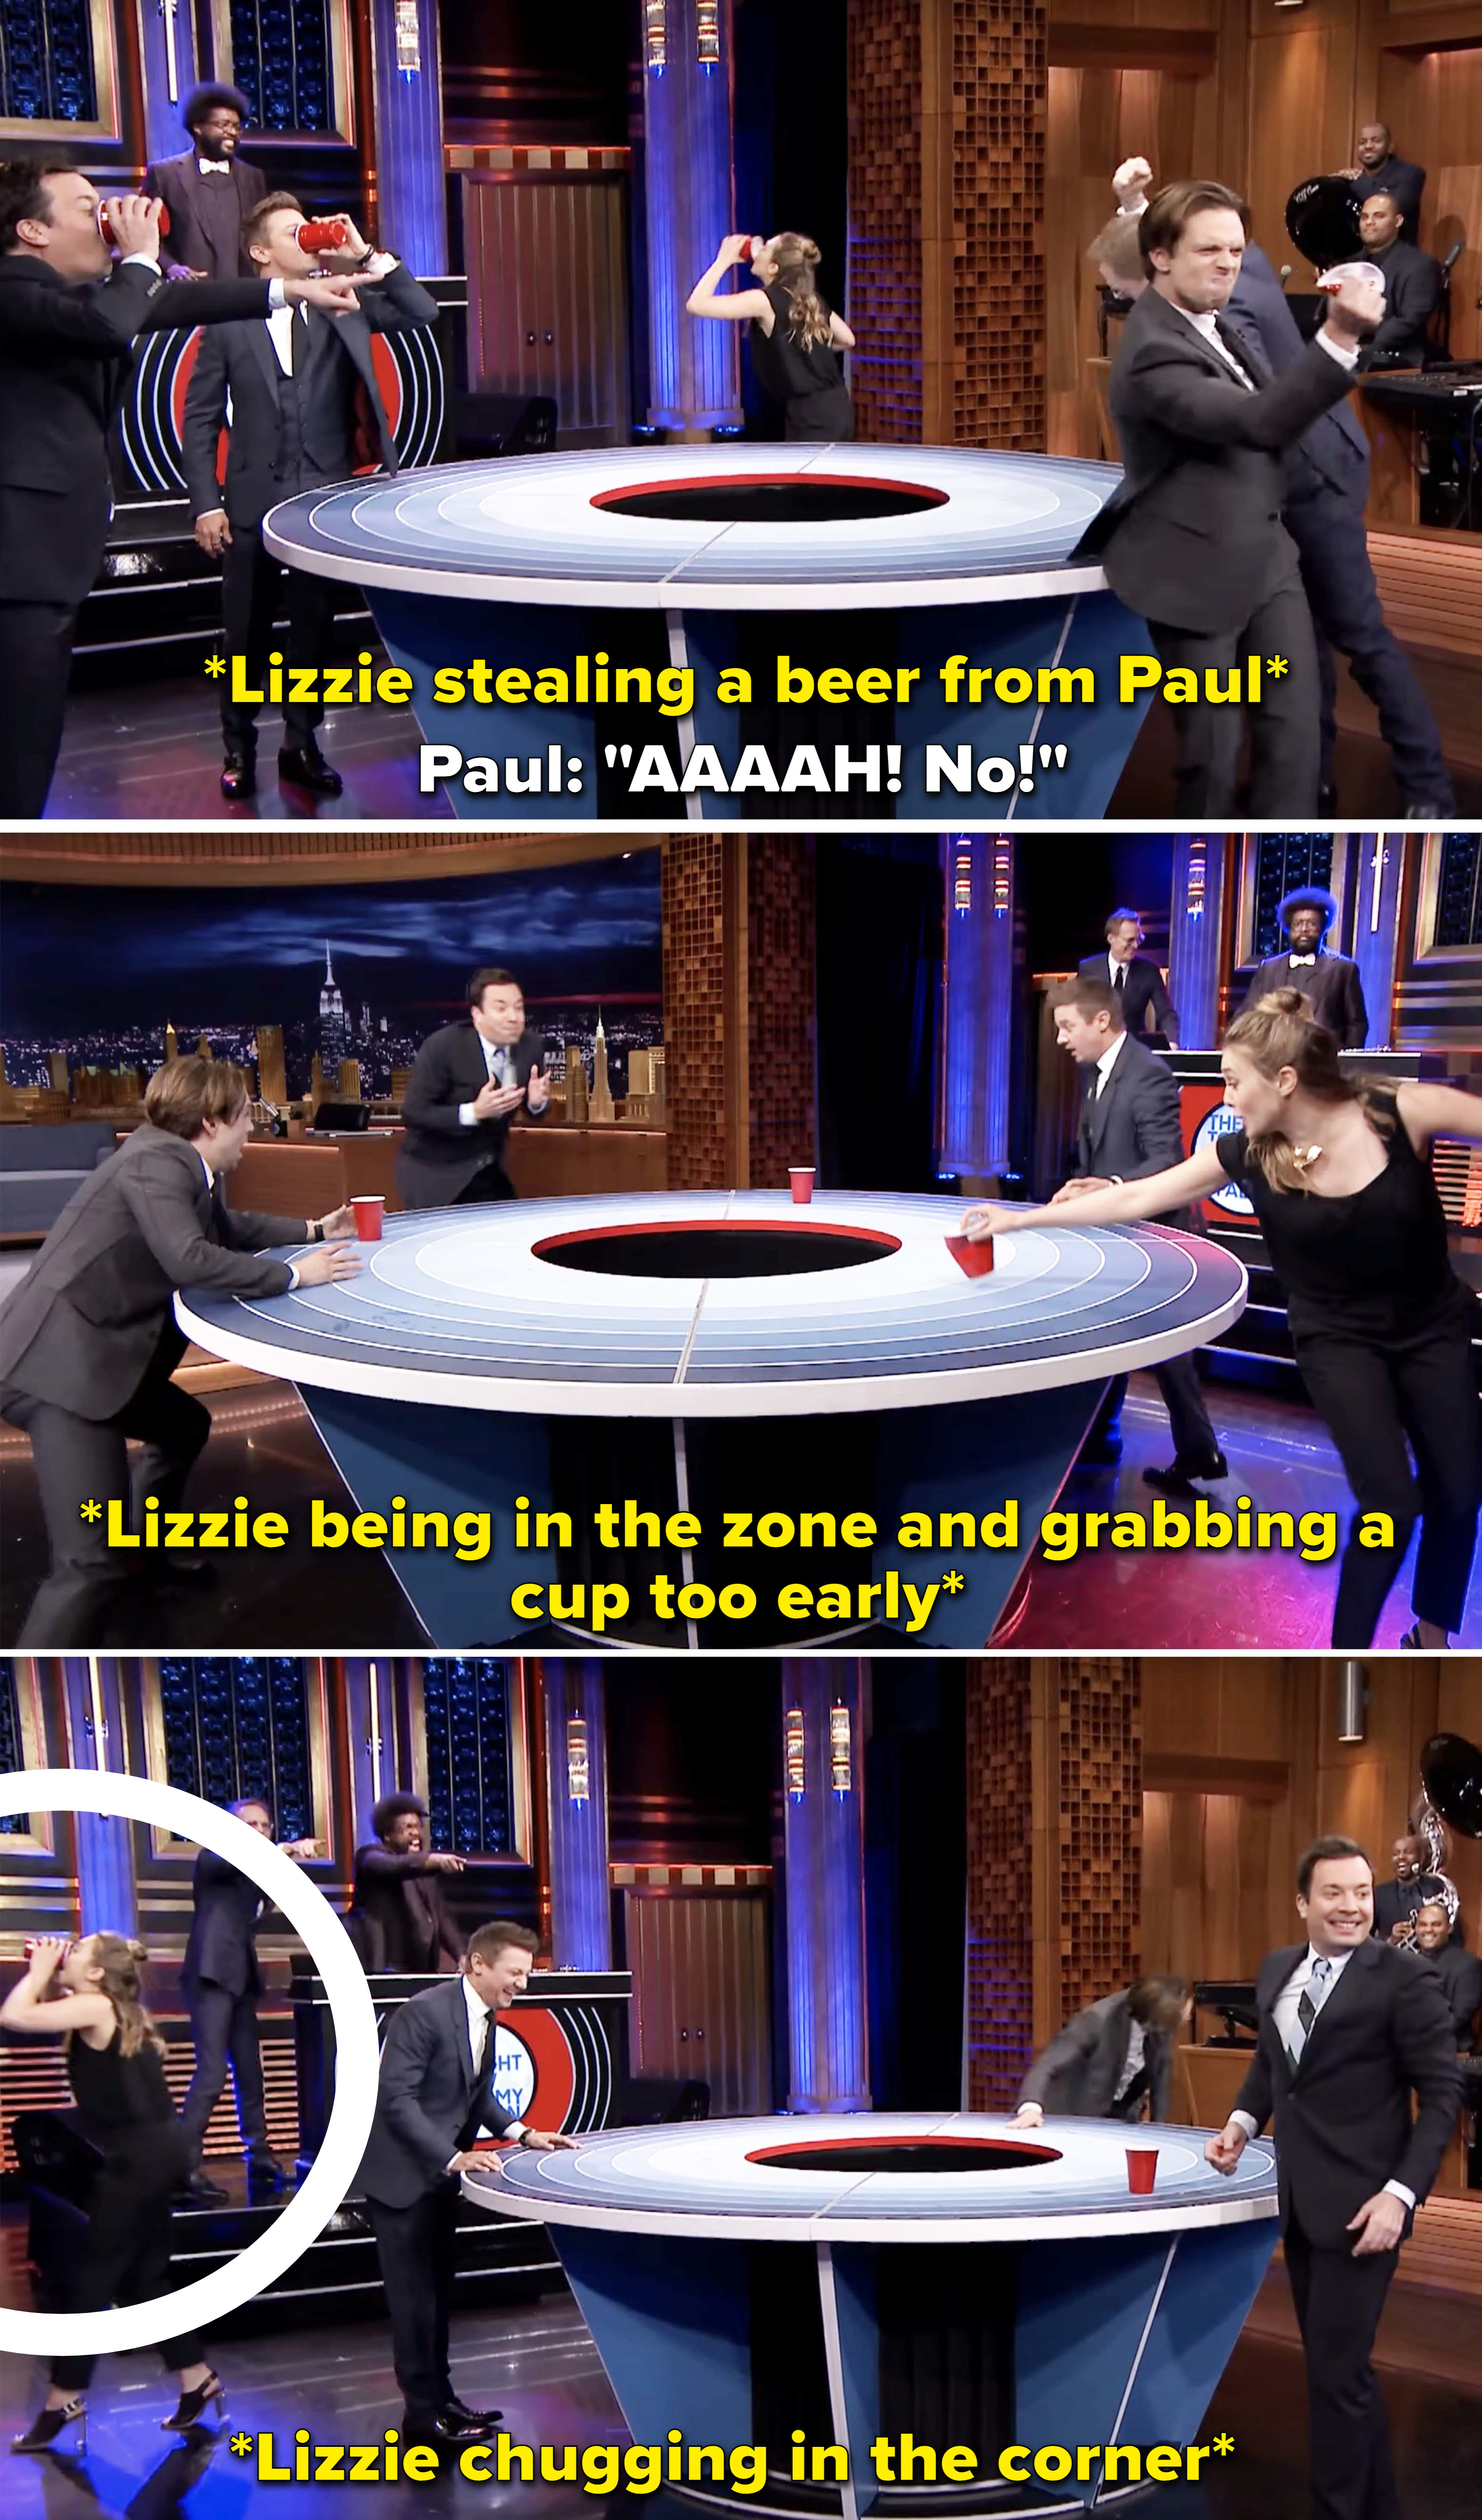 Elizabeth Olsen, Jeremy Renner, Jimmy Fallon, and Paul Bettany playing Musical Beers.